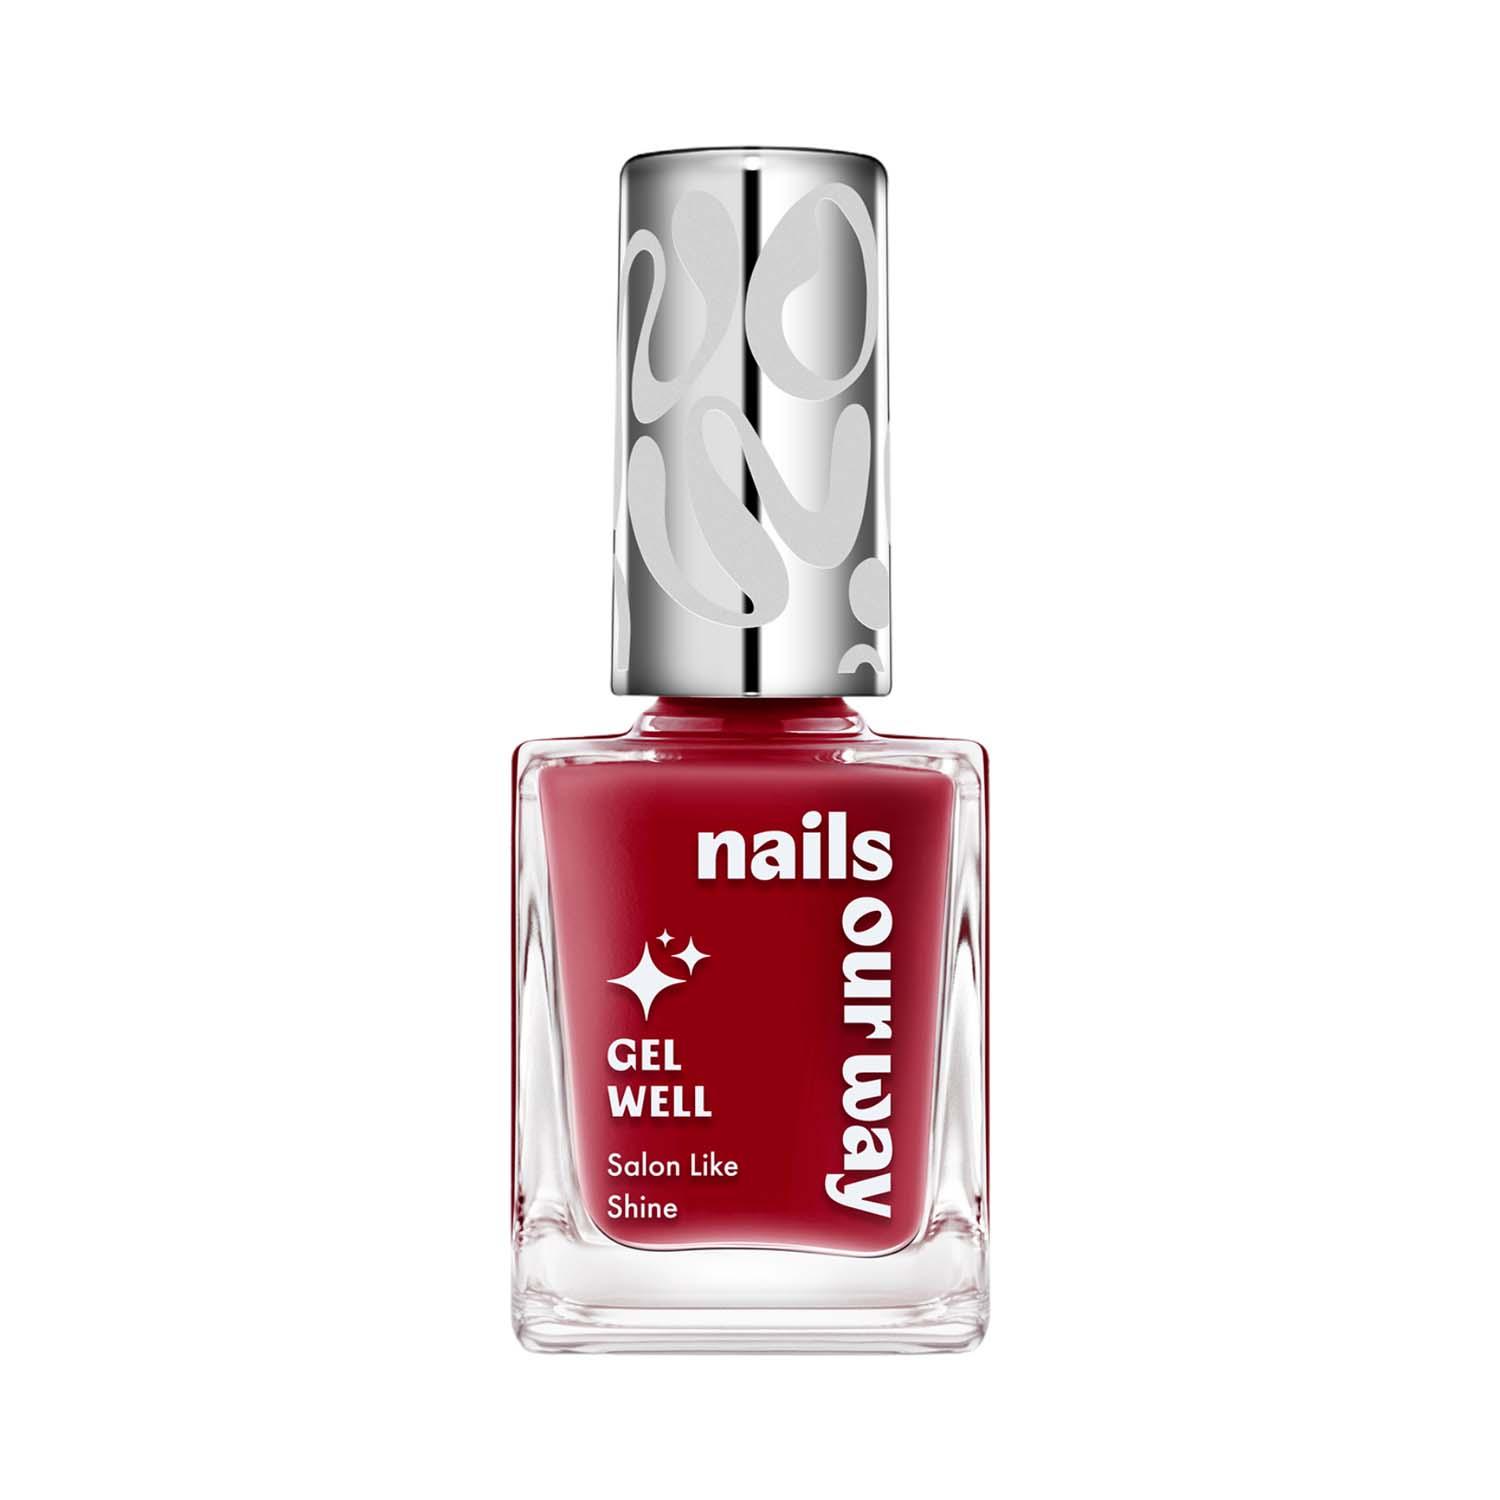 Nails Our Way | Nails Our Way Gel Well Nail Enamel - 104 Zesty (10 ml)